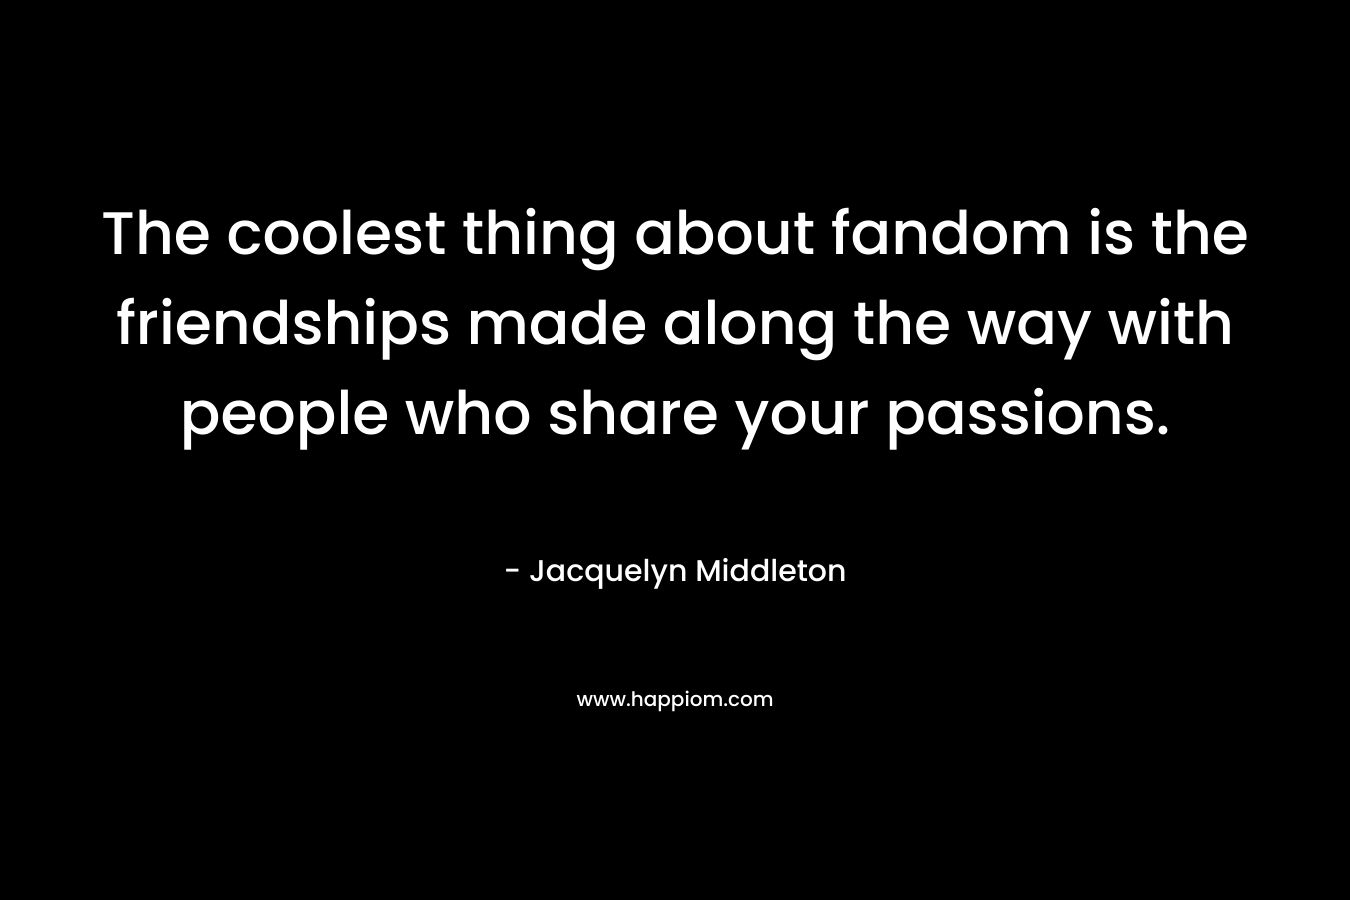 The coolest thing about fandom is the friendships made along the way with people who share your passions. – Jacquelyn Middleton